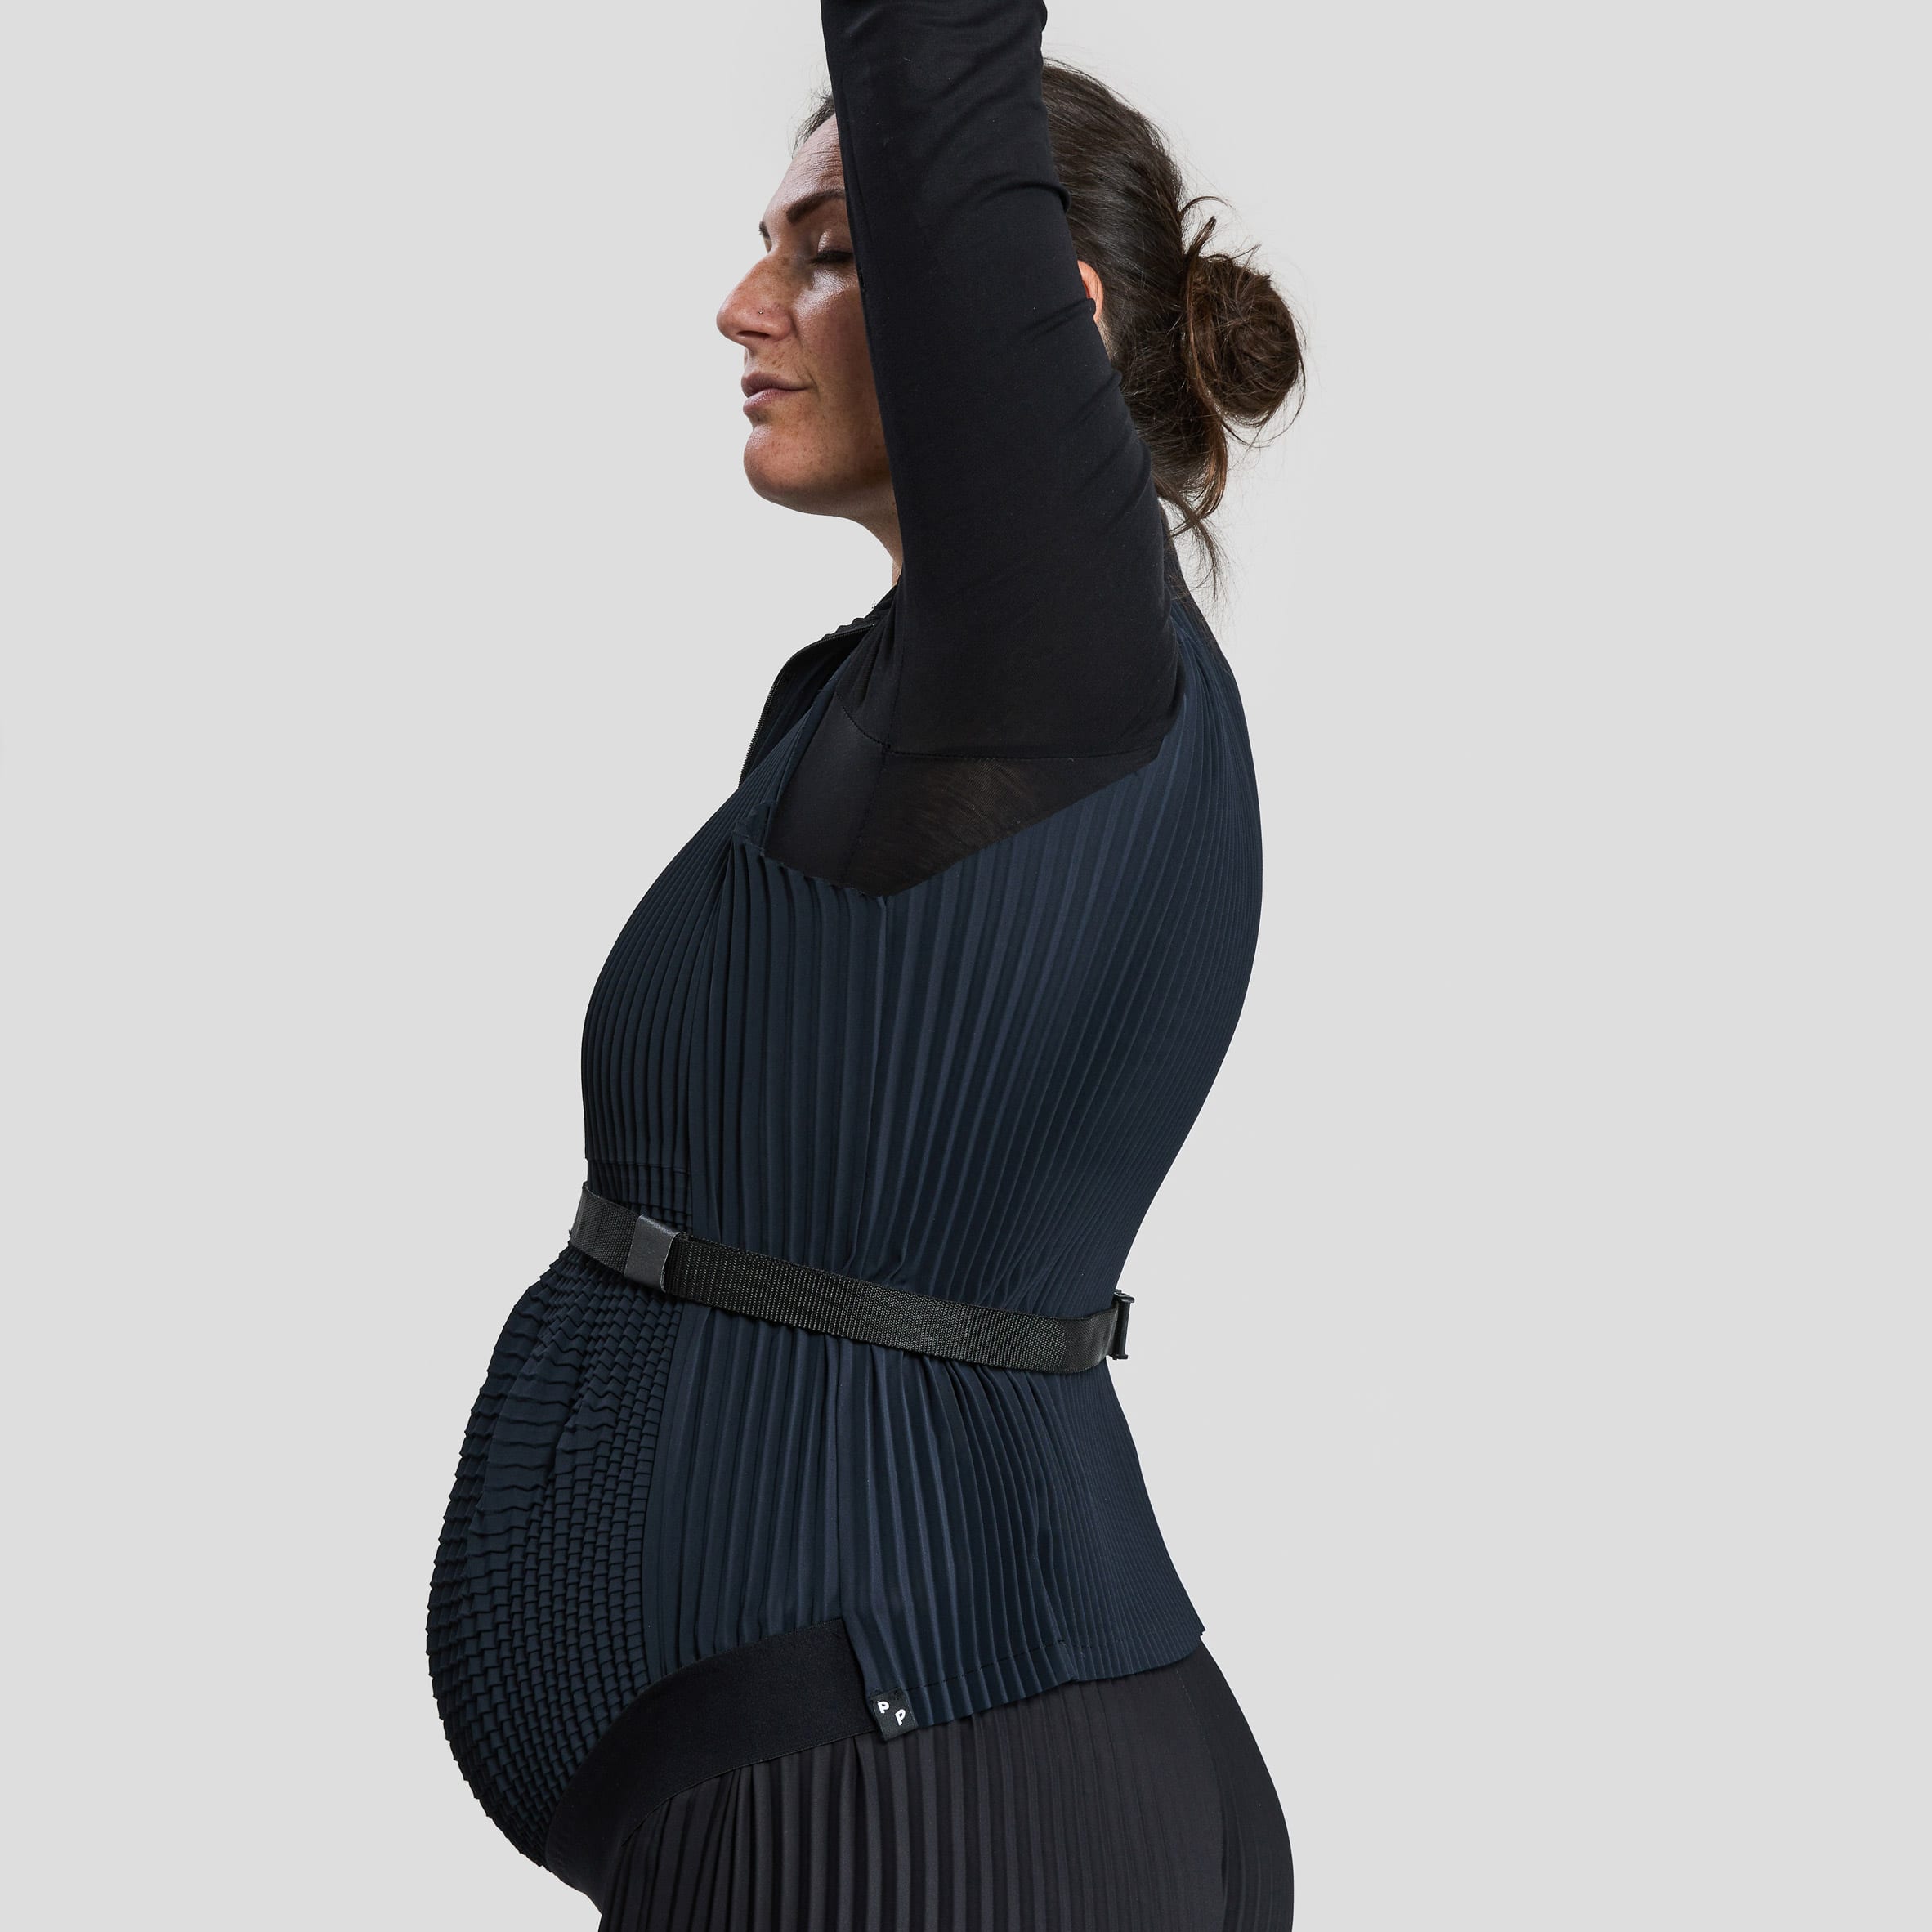 A pregnant woman wearing the Petit Pli clothes stretches